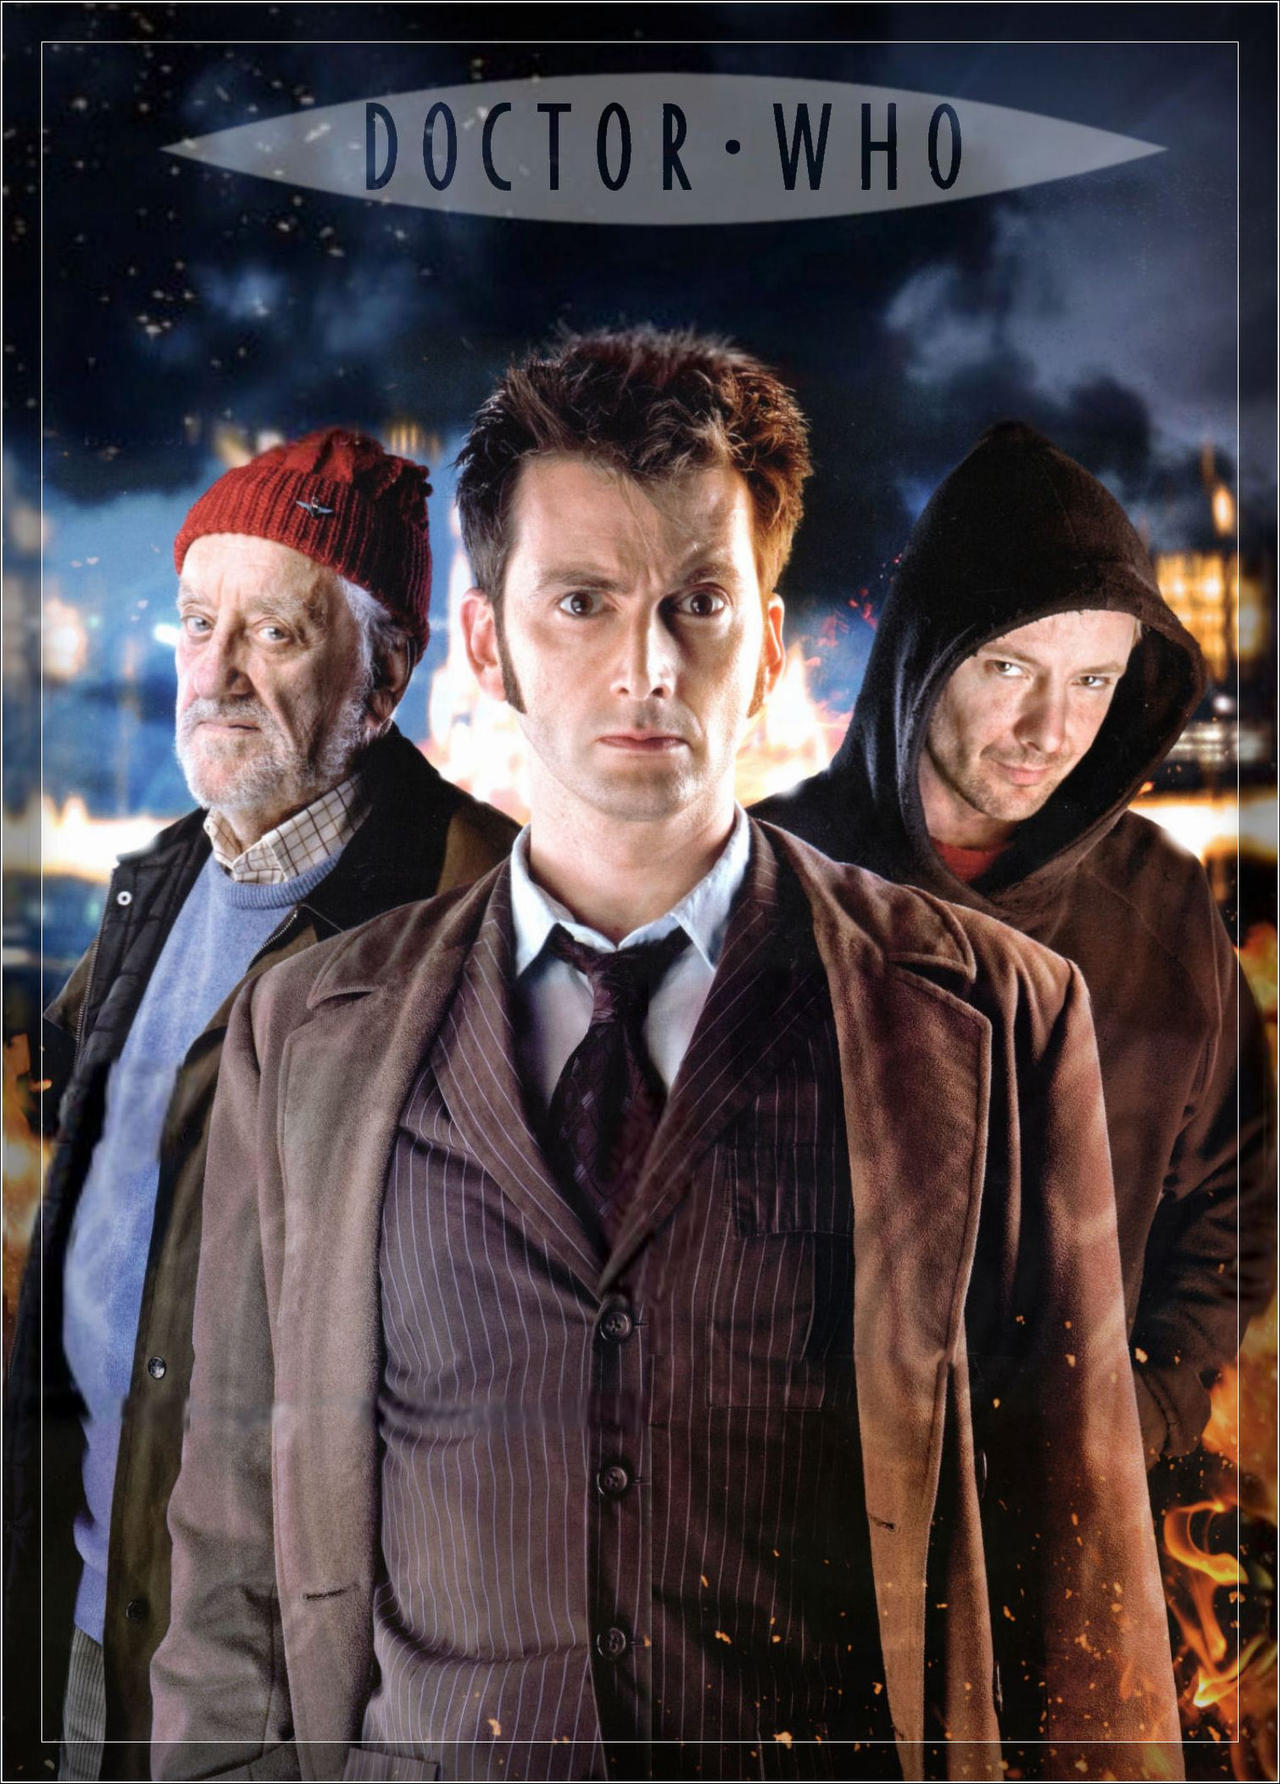 Doctor Who s04e17 poster